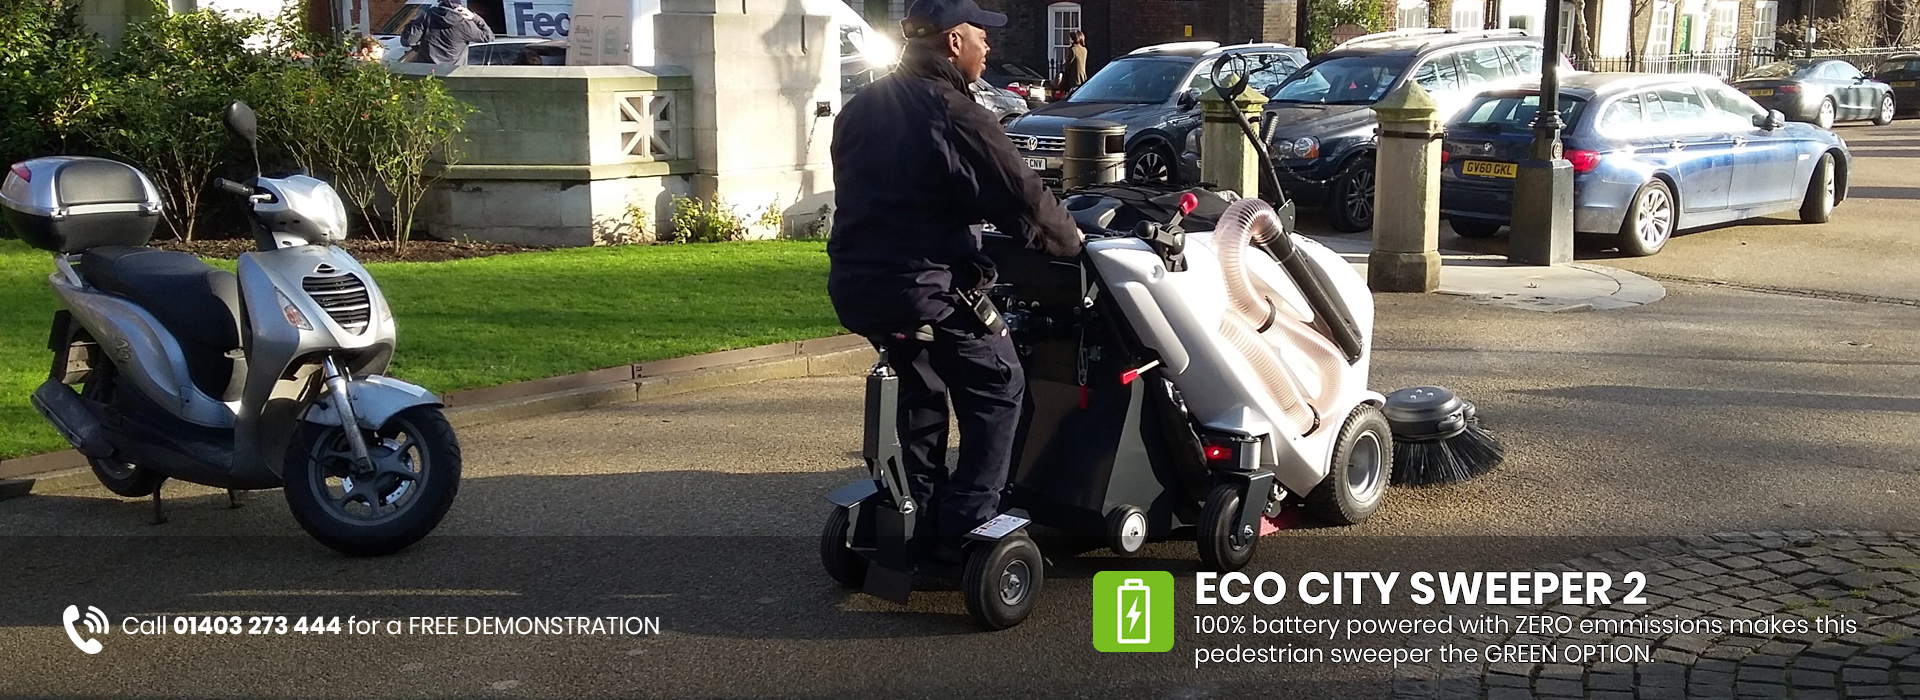 The ECO CITY SWEEPER 2